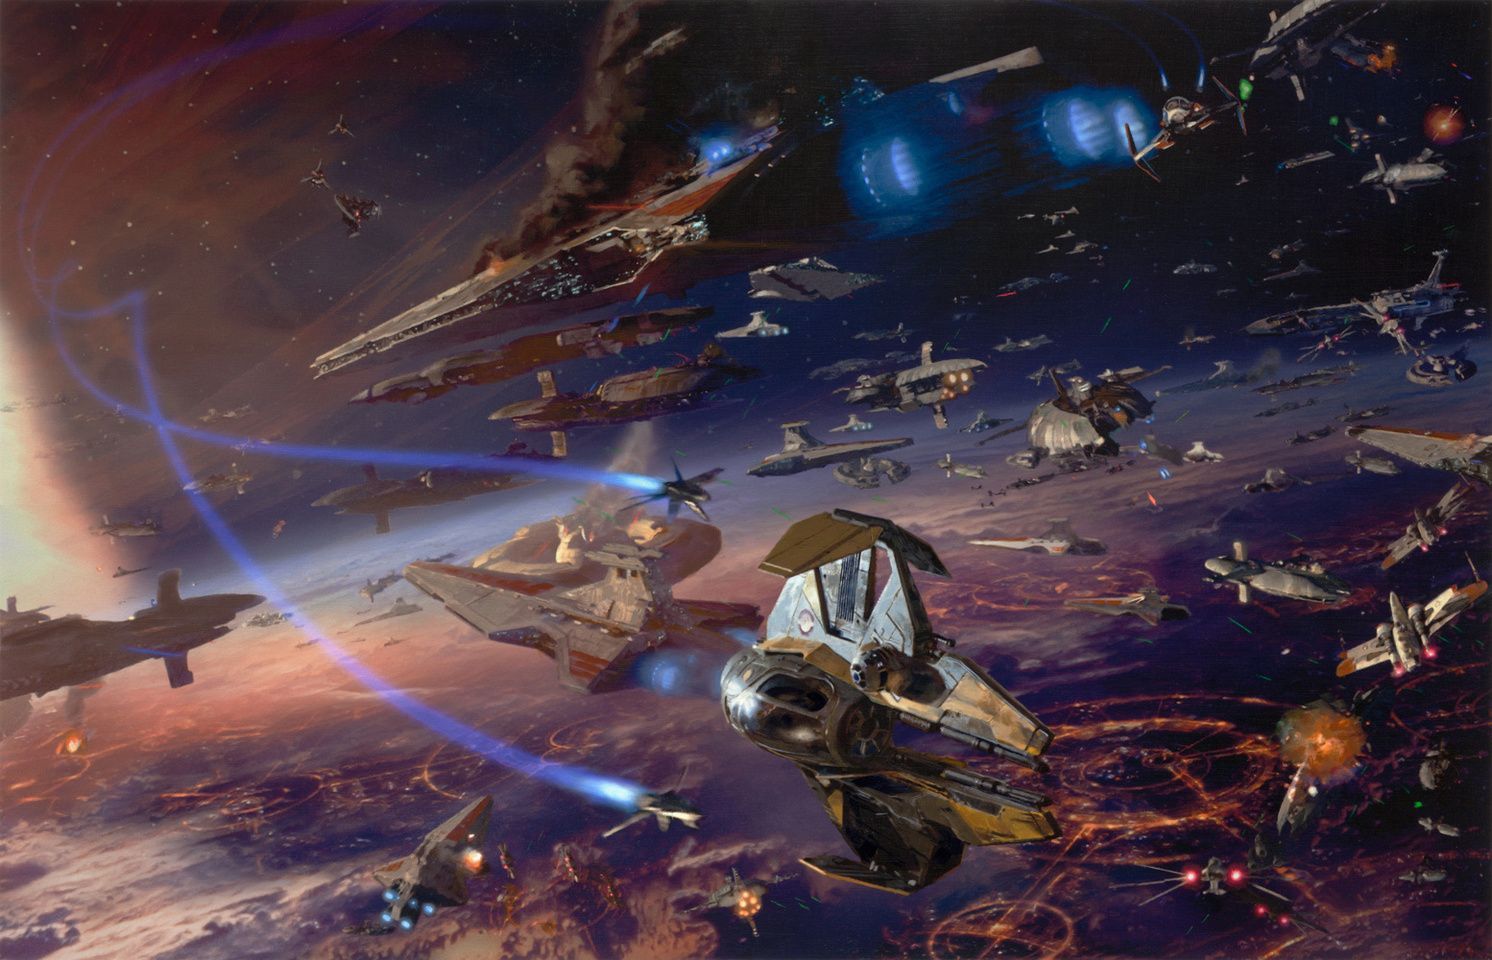 Film and Video Concept. Star Wars: Battle Of Coruscant Rey Books. Star wars ships, Star wars clone wars, Star wars poster